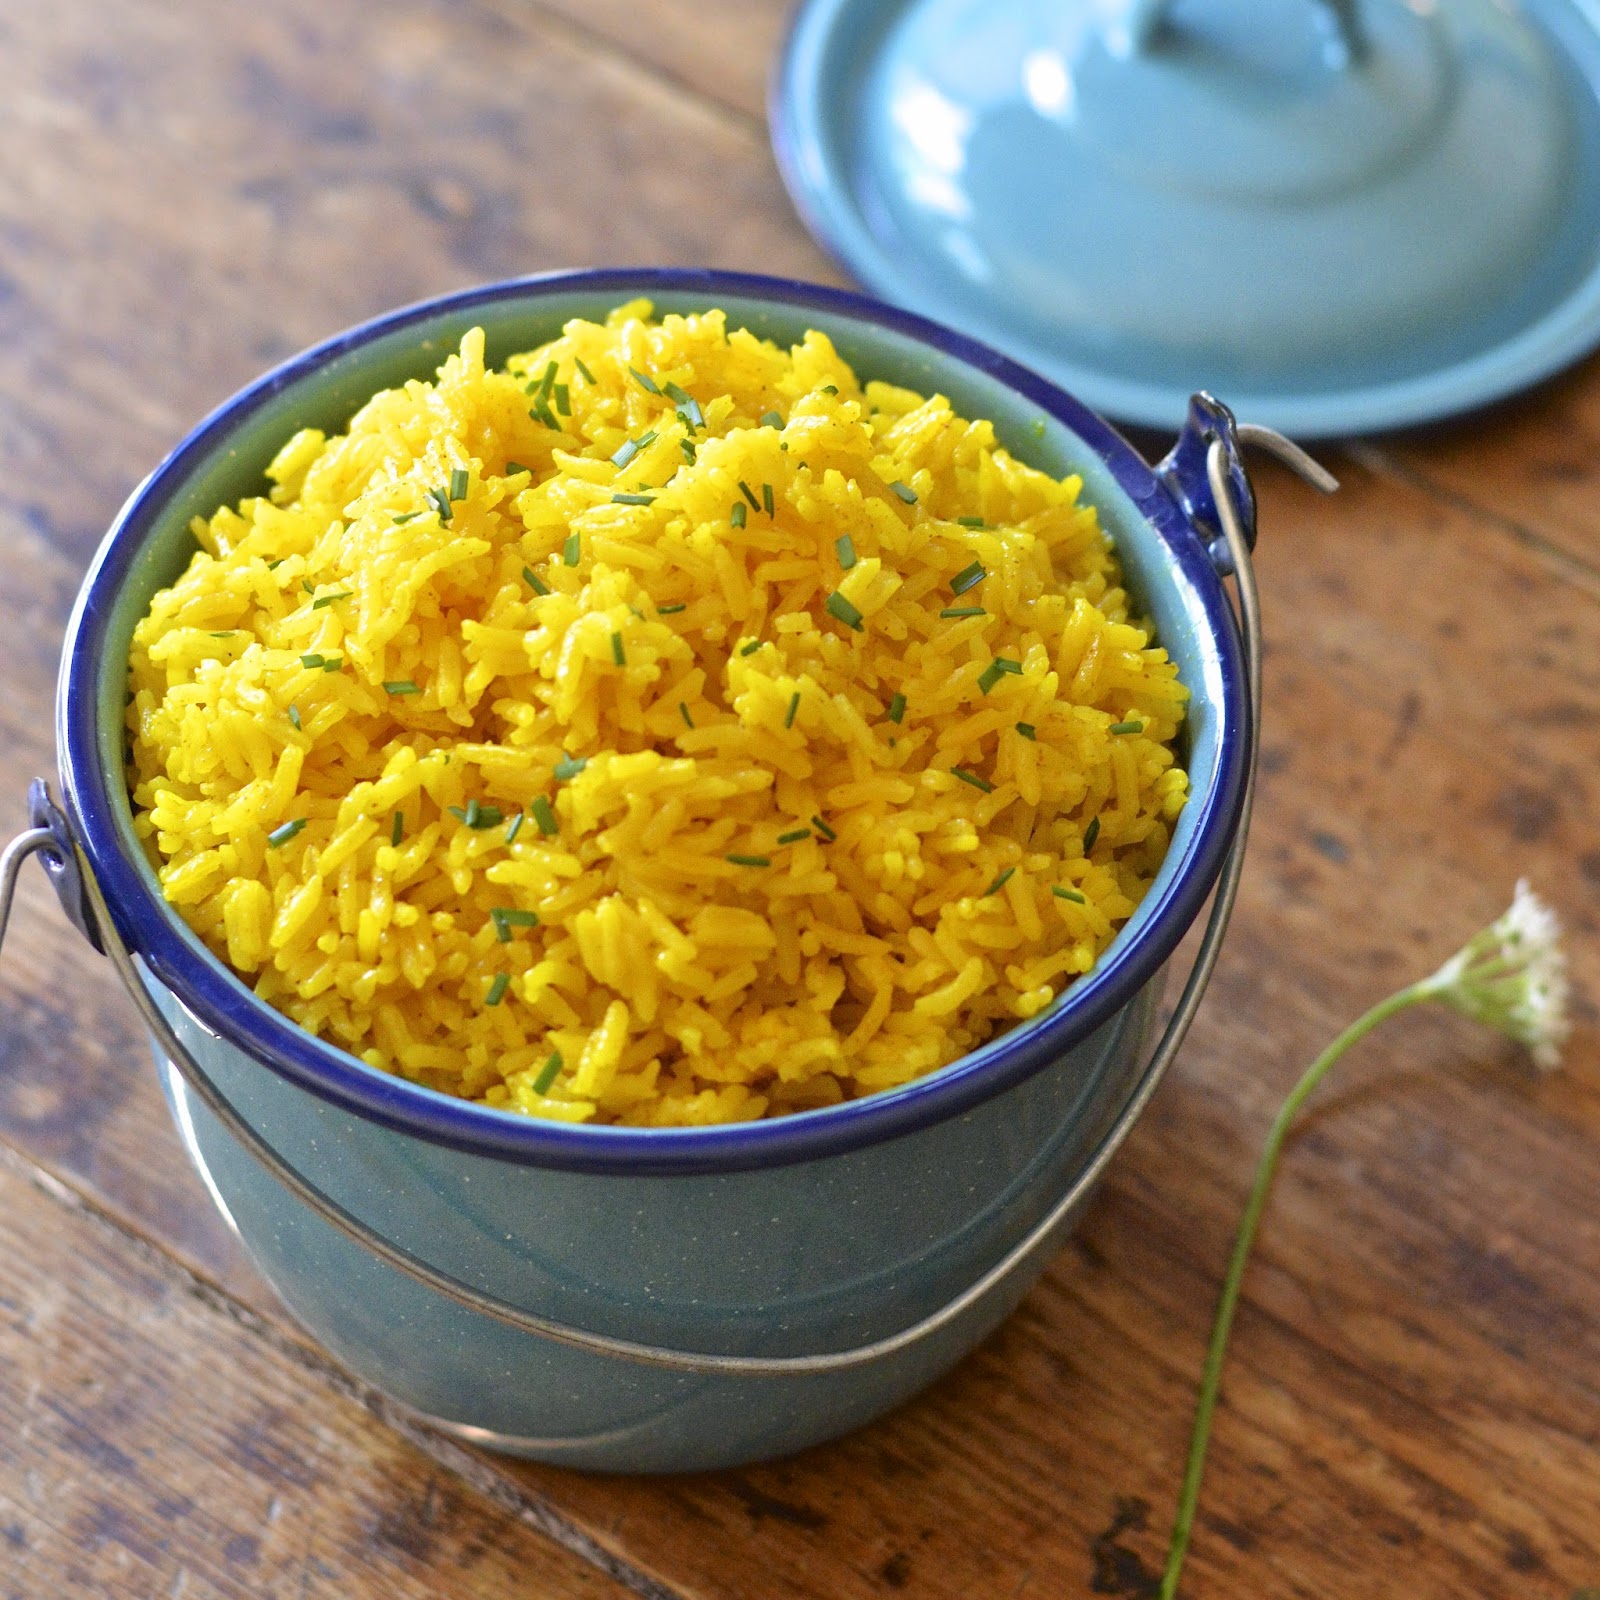 This easy yellow rice is flavored with turmeric and is ready in under 20 minutes